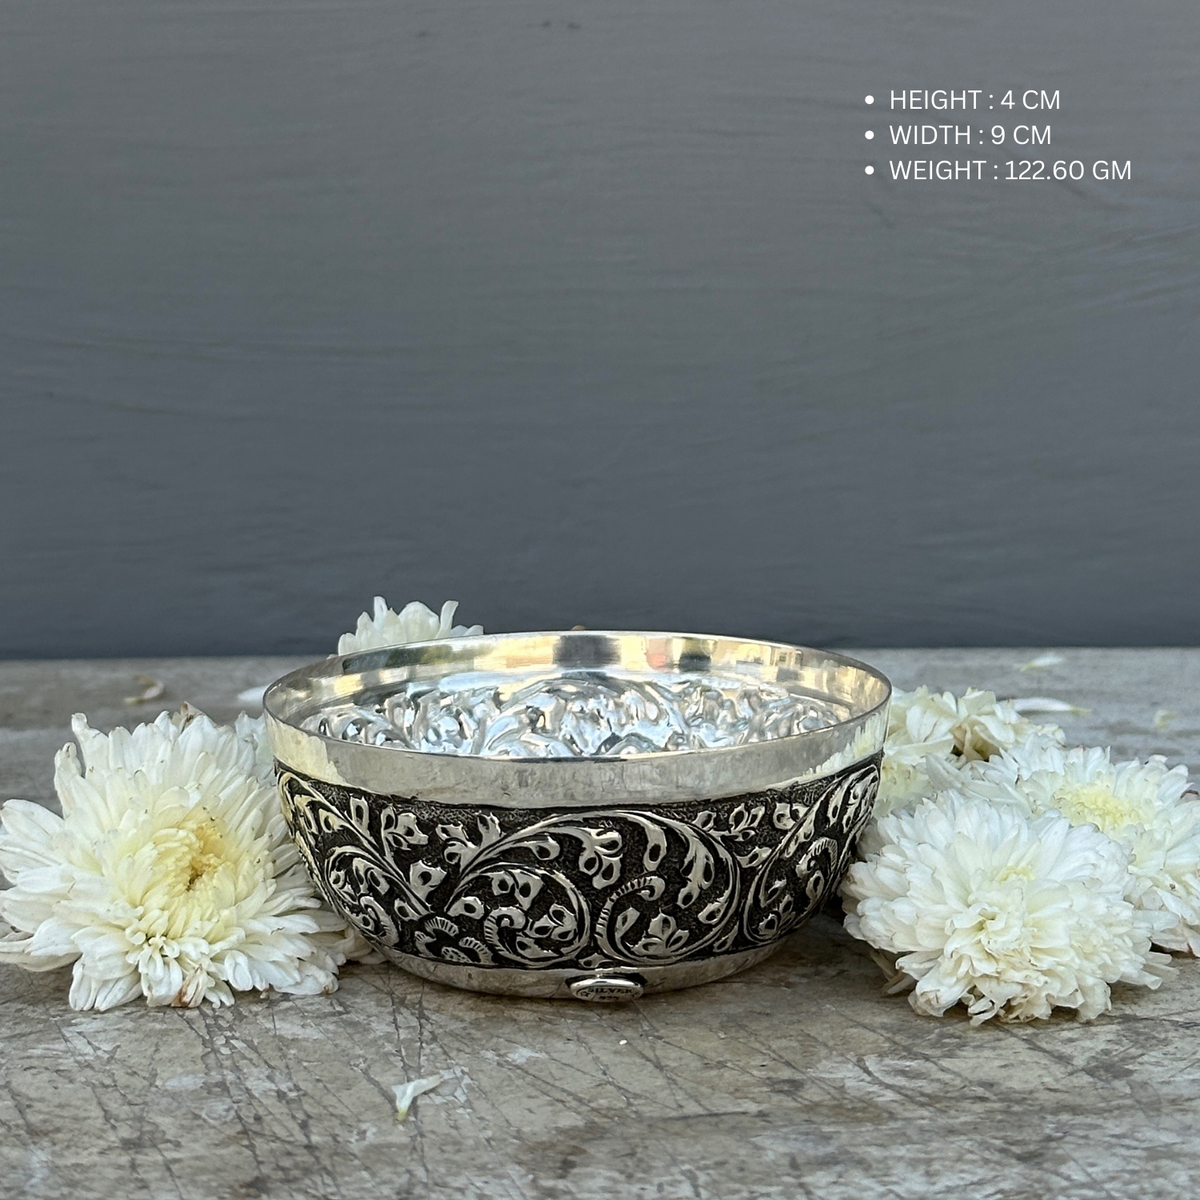 Shwetana handcrafted sterling silver bowl